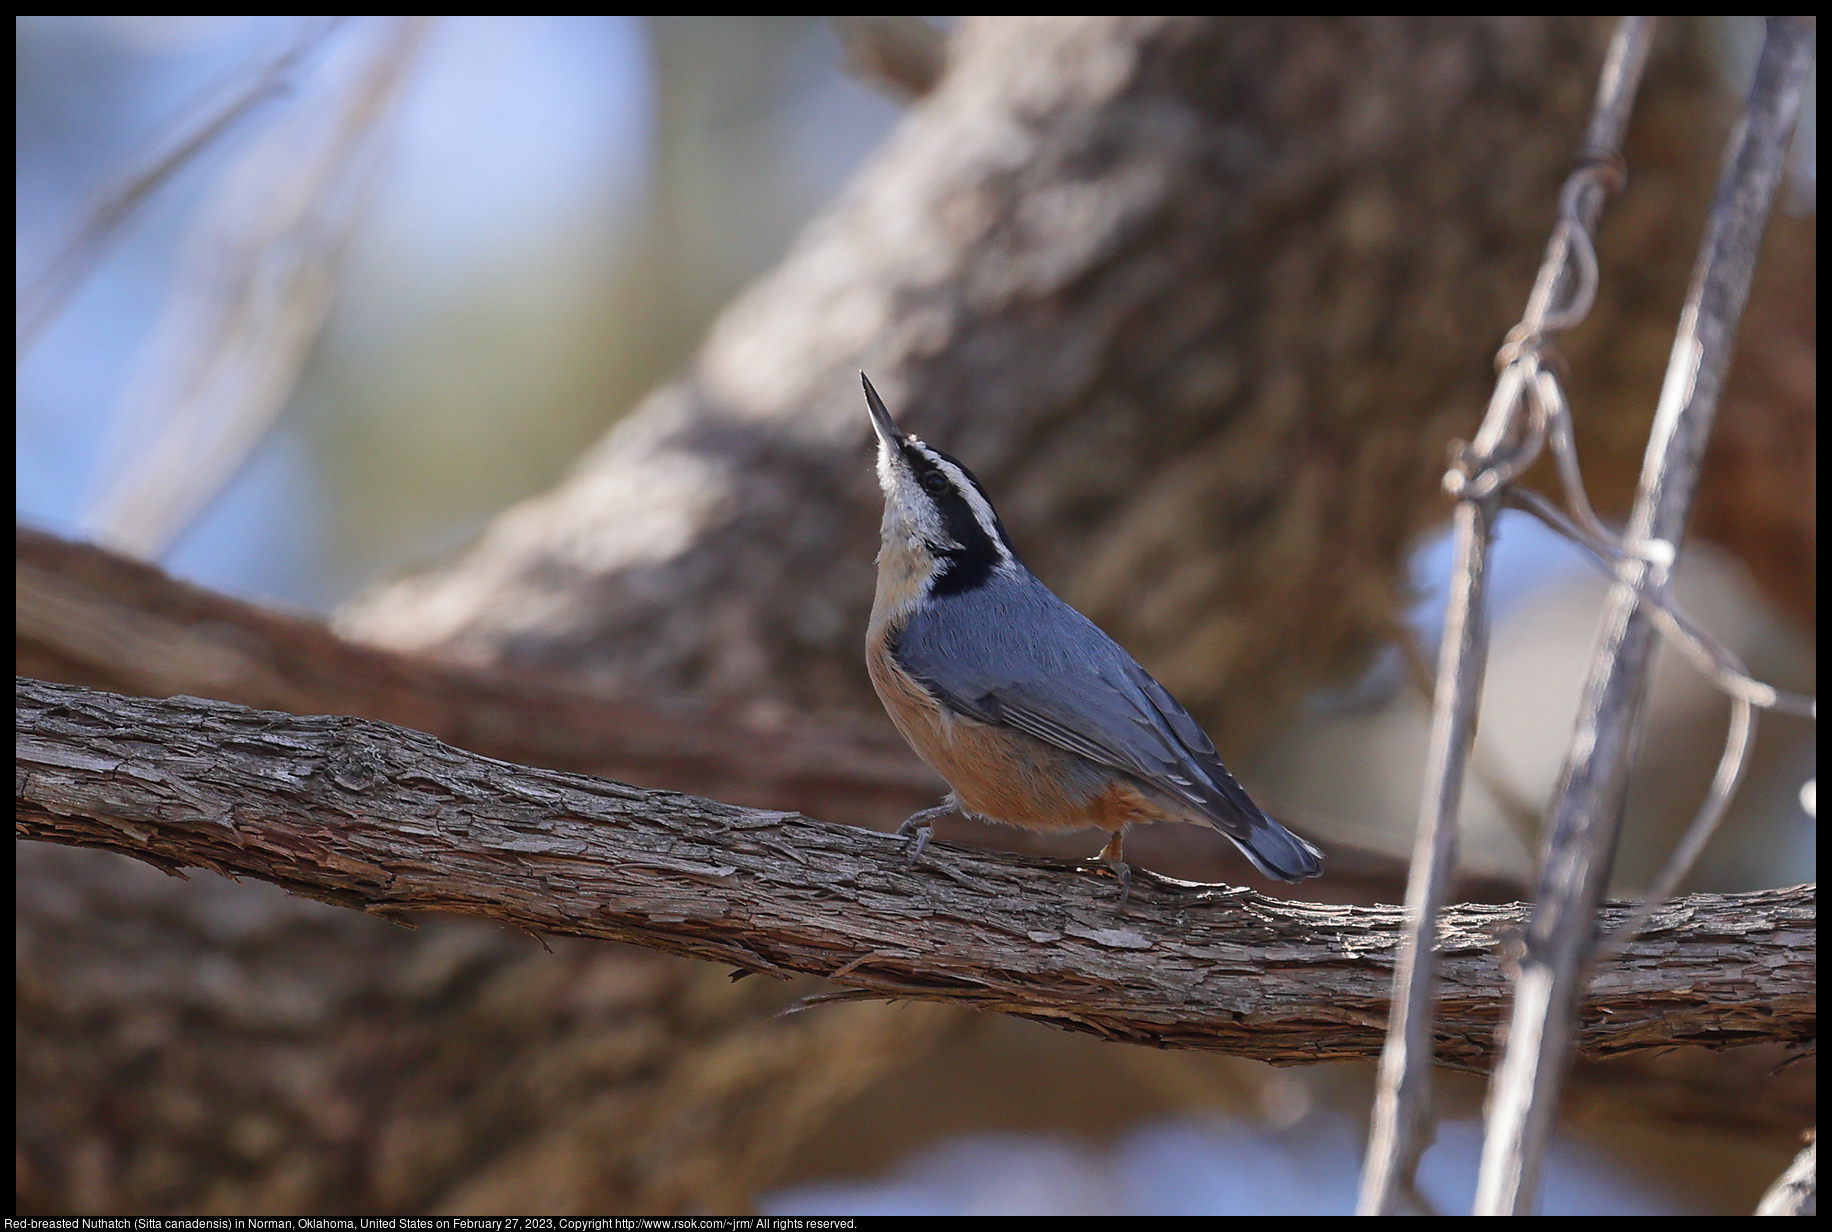 Red-breasted Nuthatch (Sitta canadensis) in Norman, Oklahoma, United States on February 27, 2023